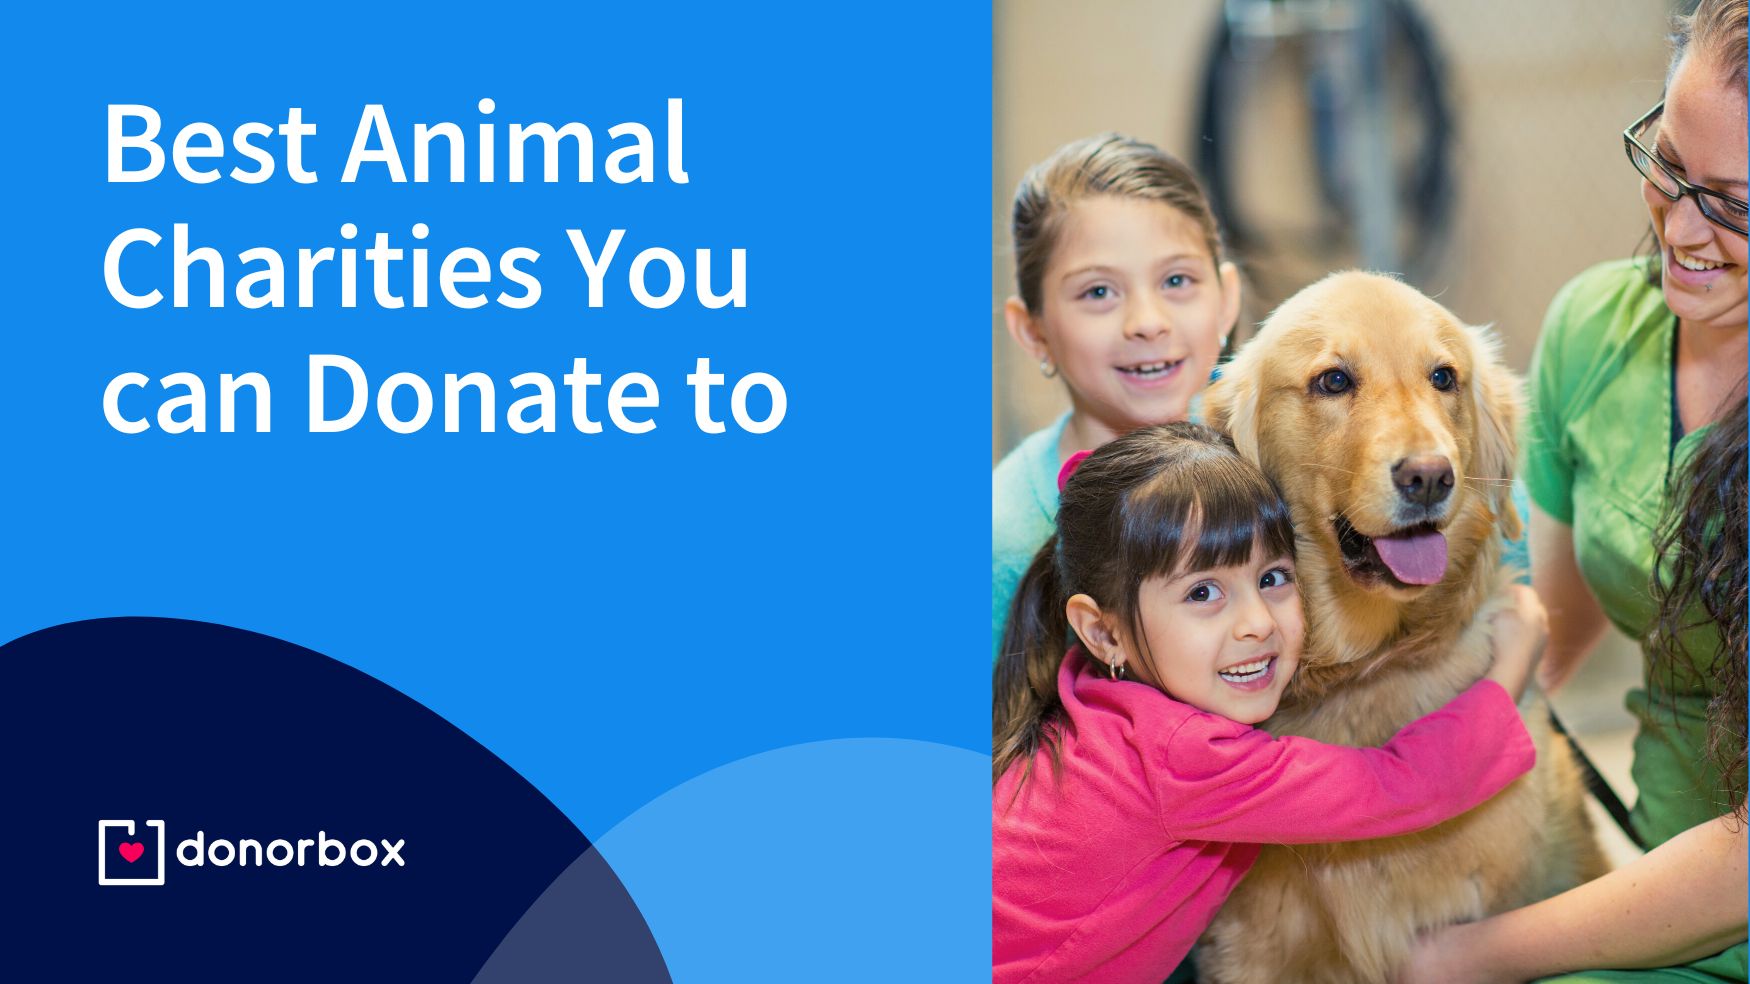 17 Best Animal Charities You Can Donate To